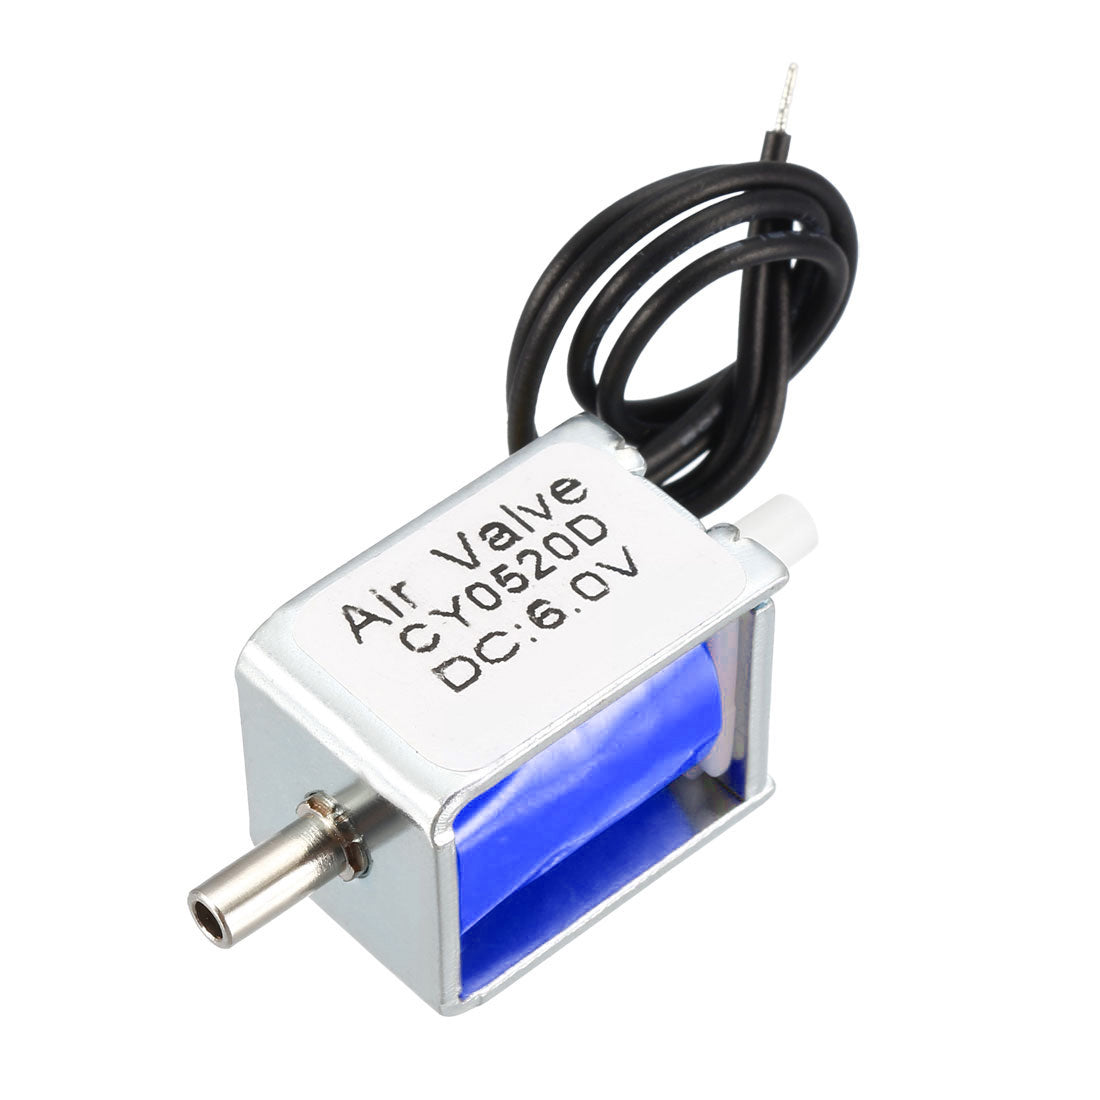 uxcell Uxcell Miniature Solenoid Valve 2 Way Normally Closed DC6V 0.38A Air Solenoid Valve